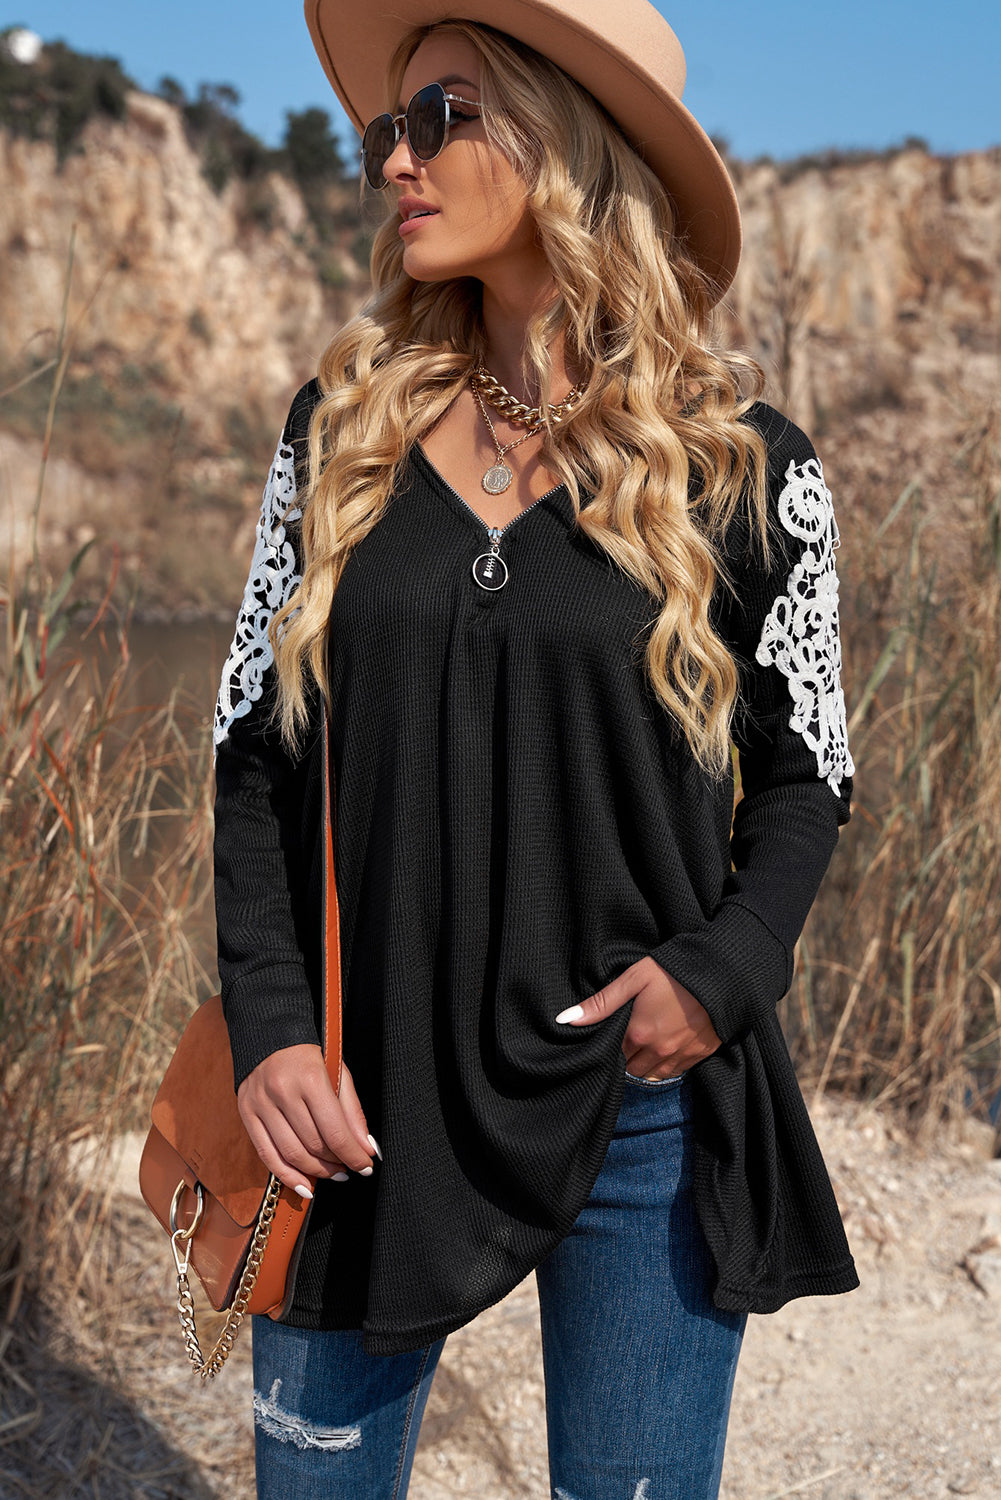 Zip V Neck Lace Patch Long Sleeve Tunic Top